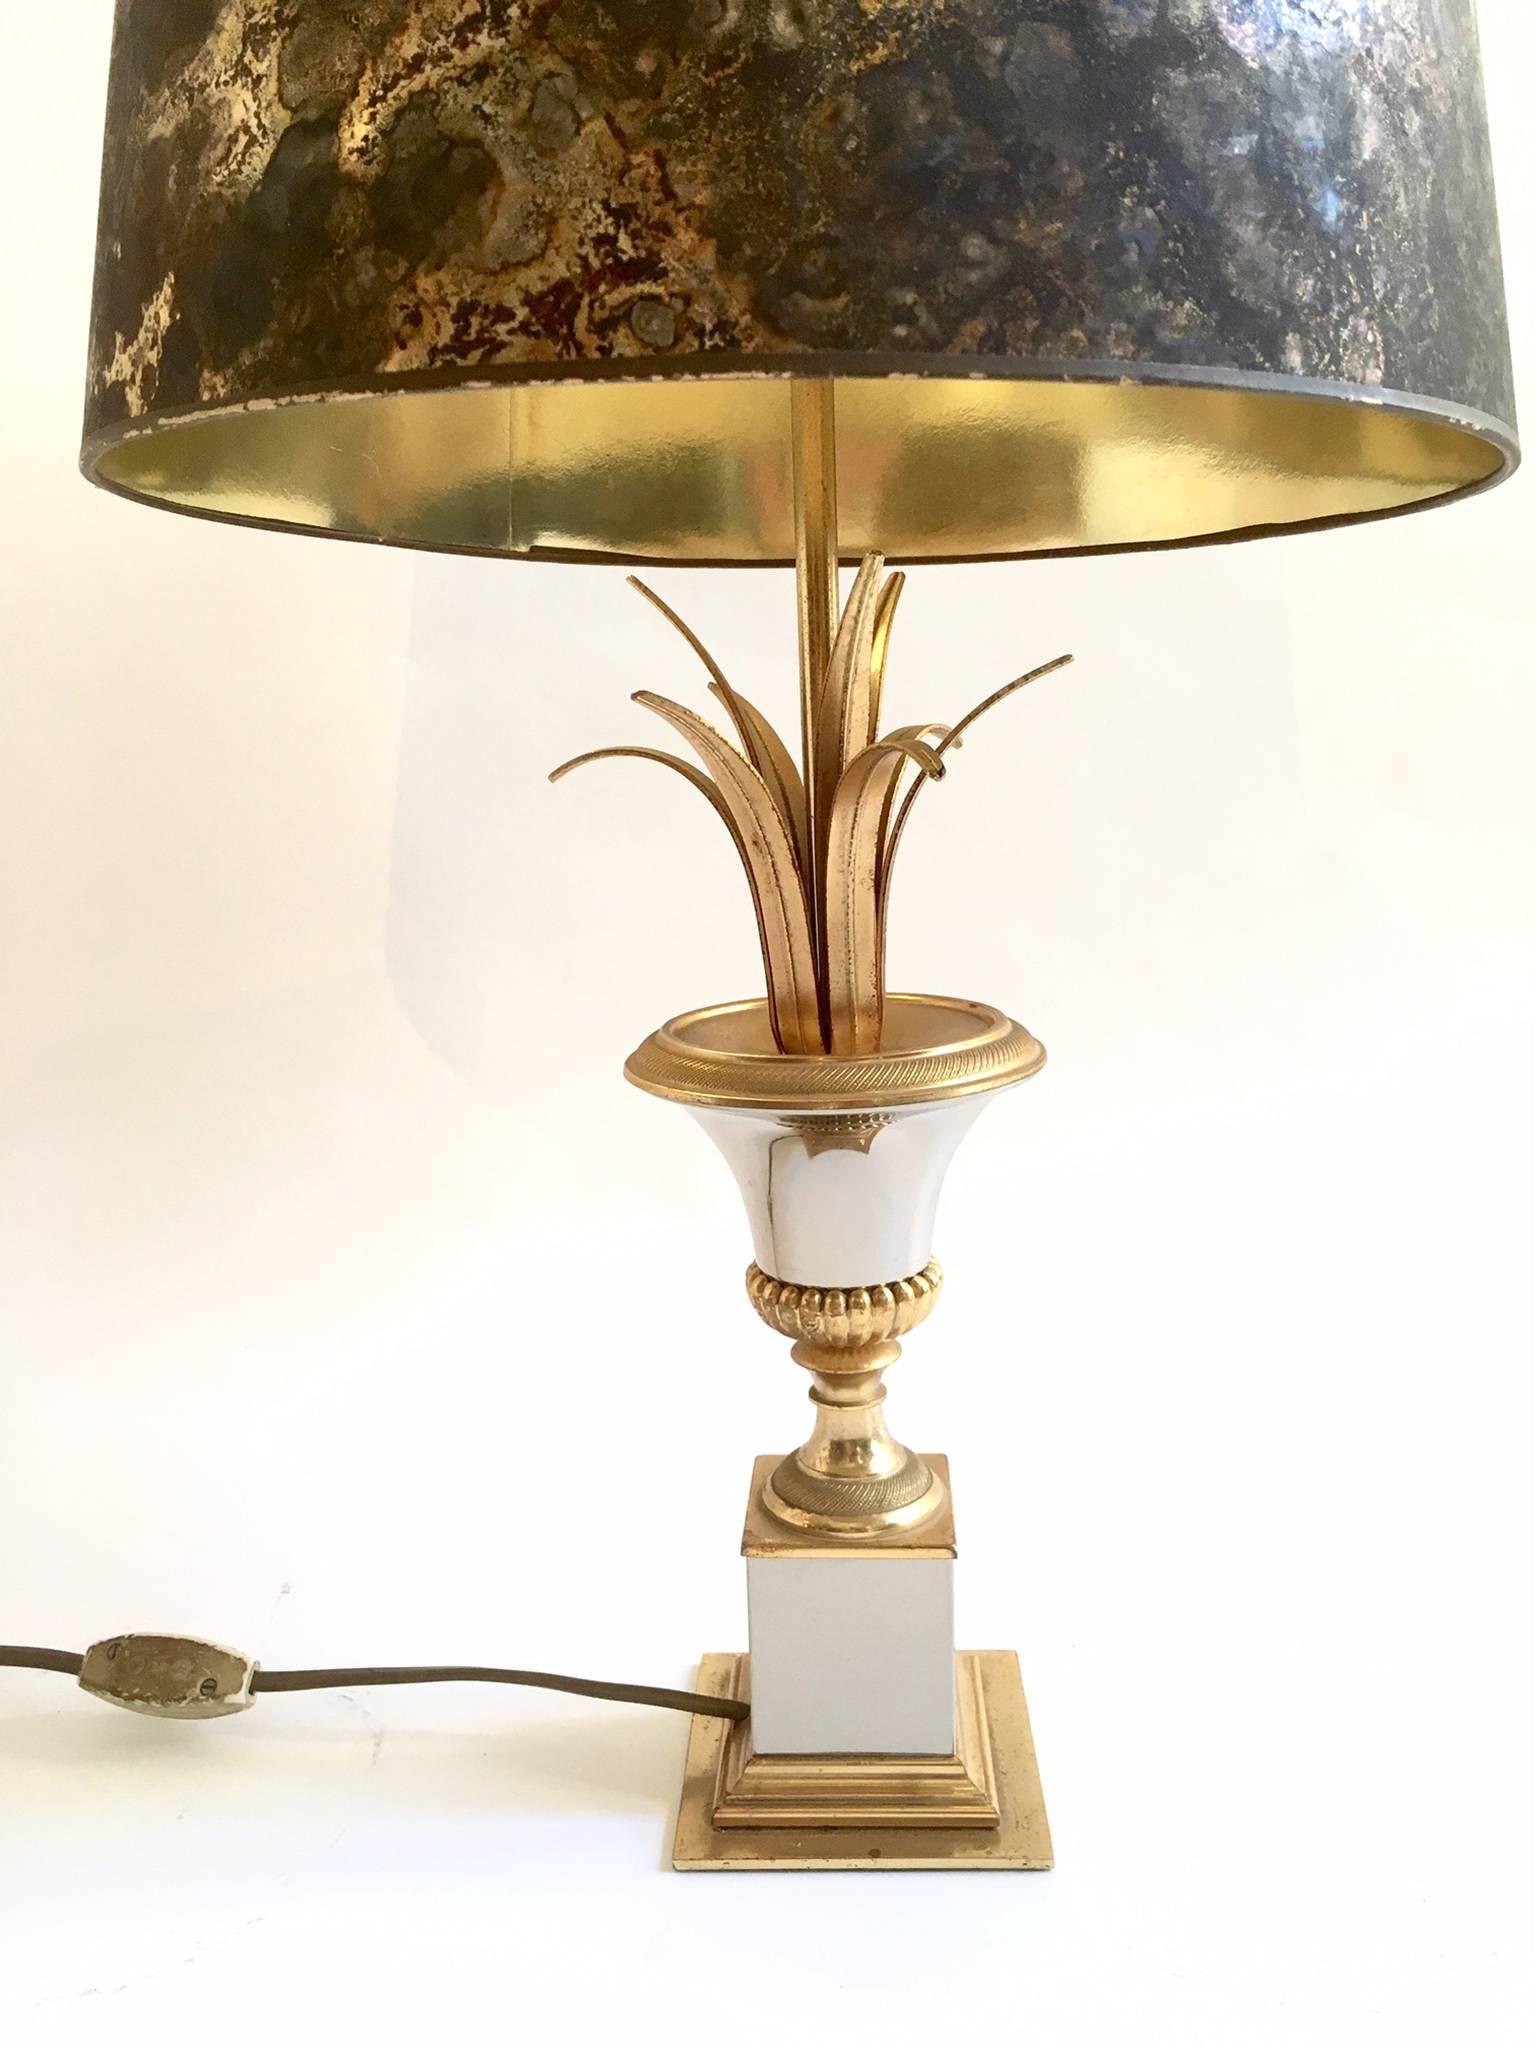 Maison Charles bronze trophy lamp with wheat details and acorn finial, original shade.